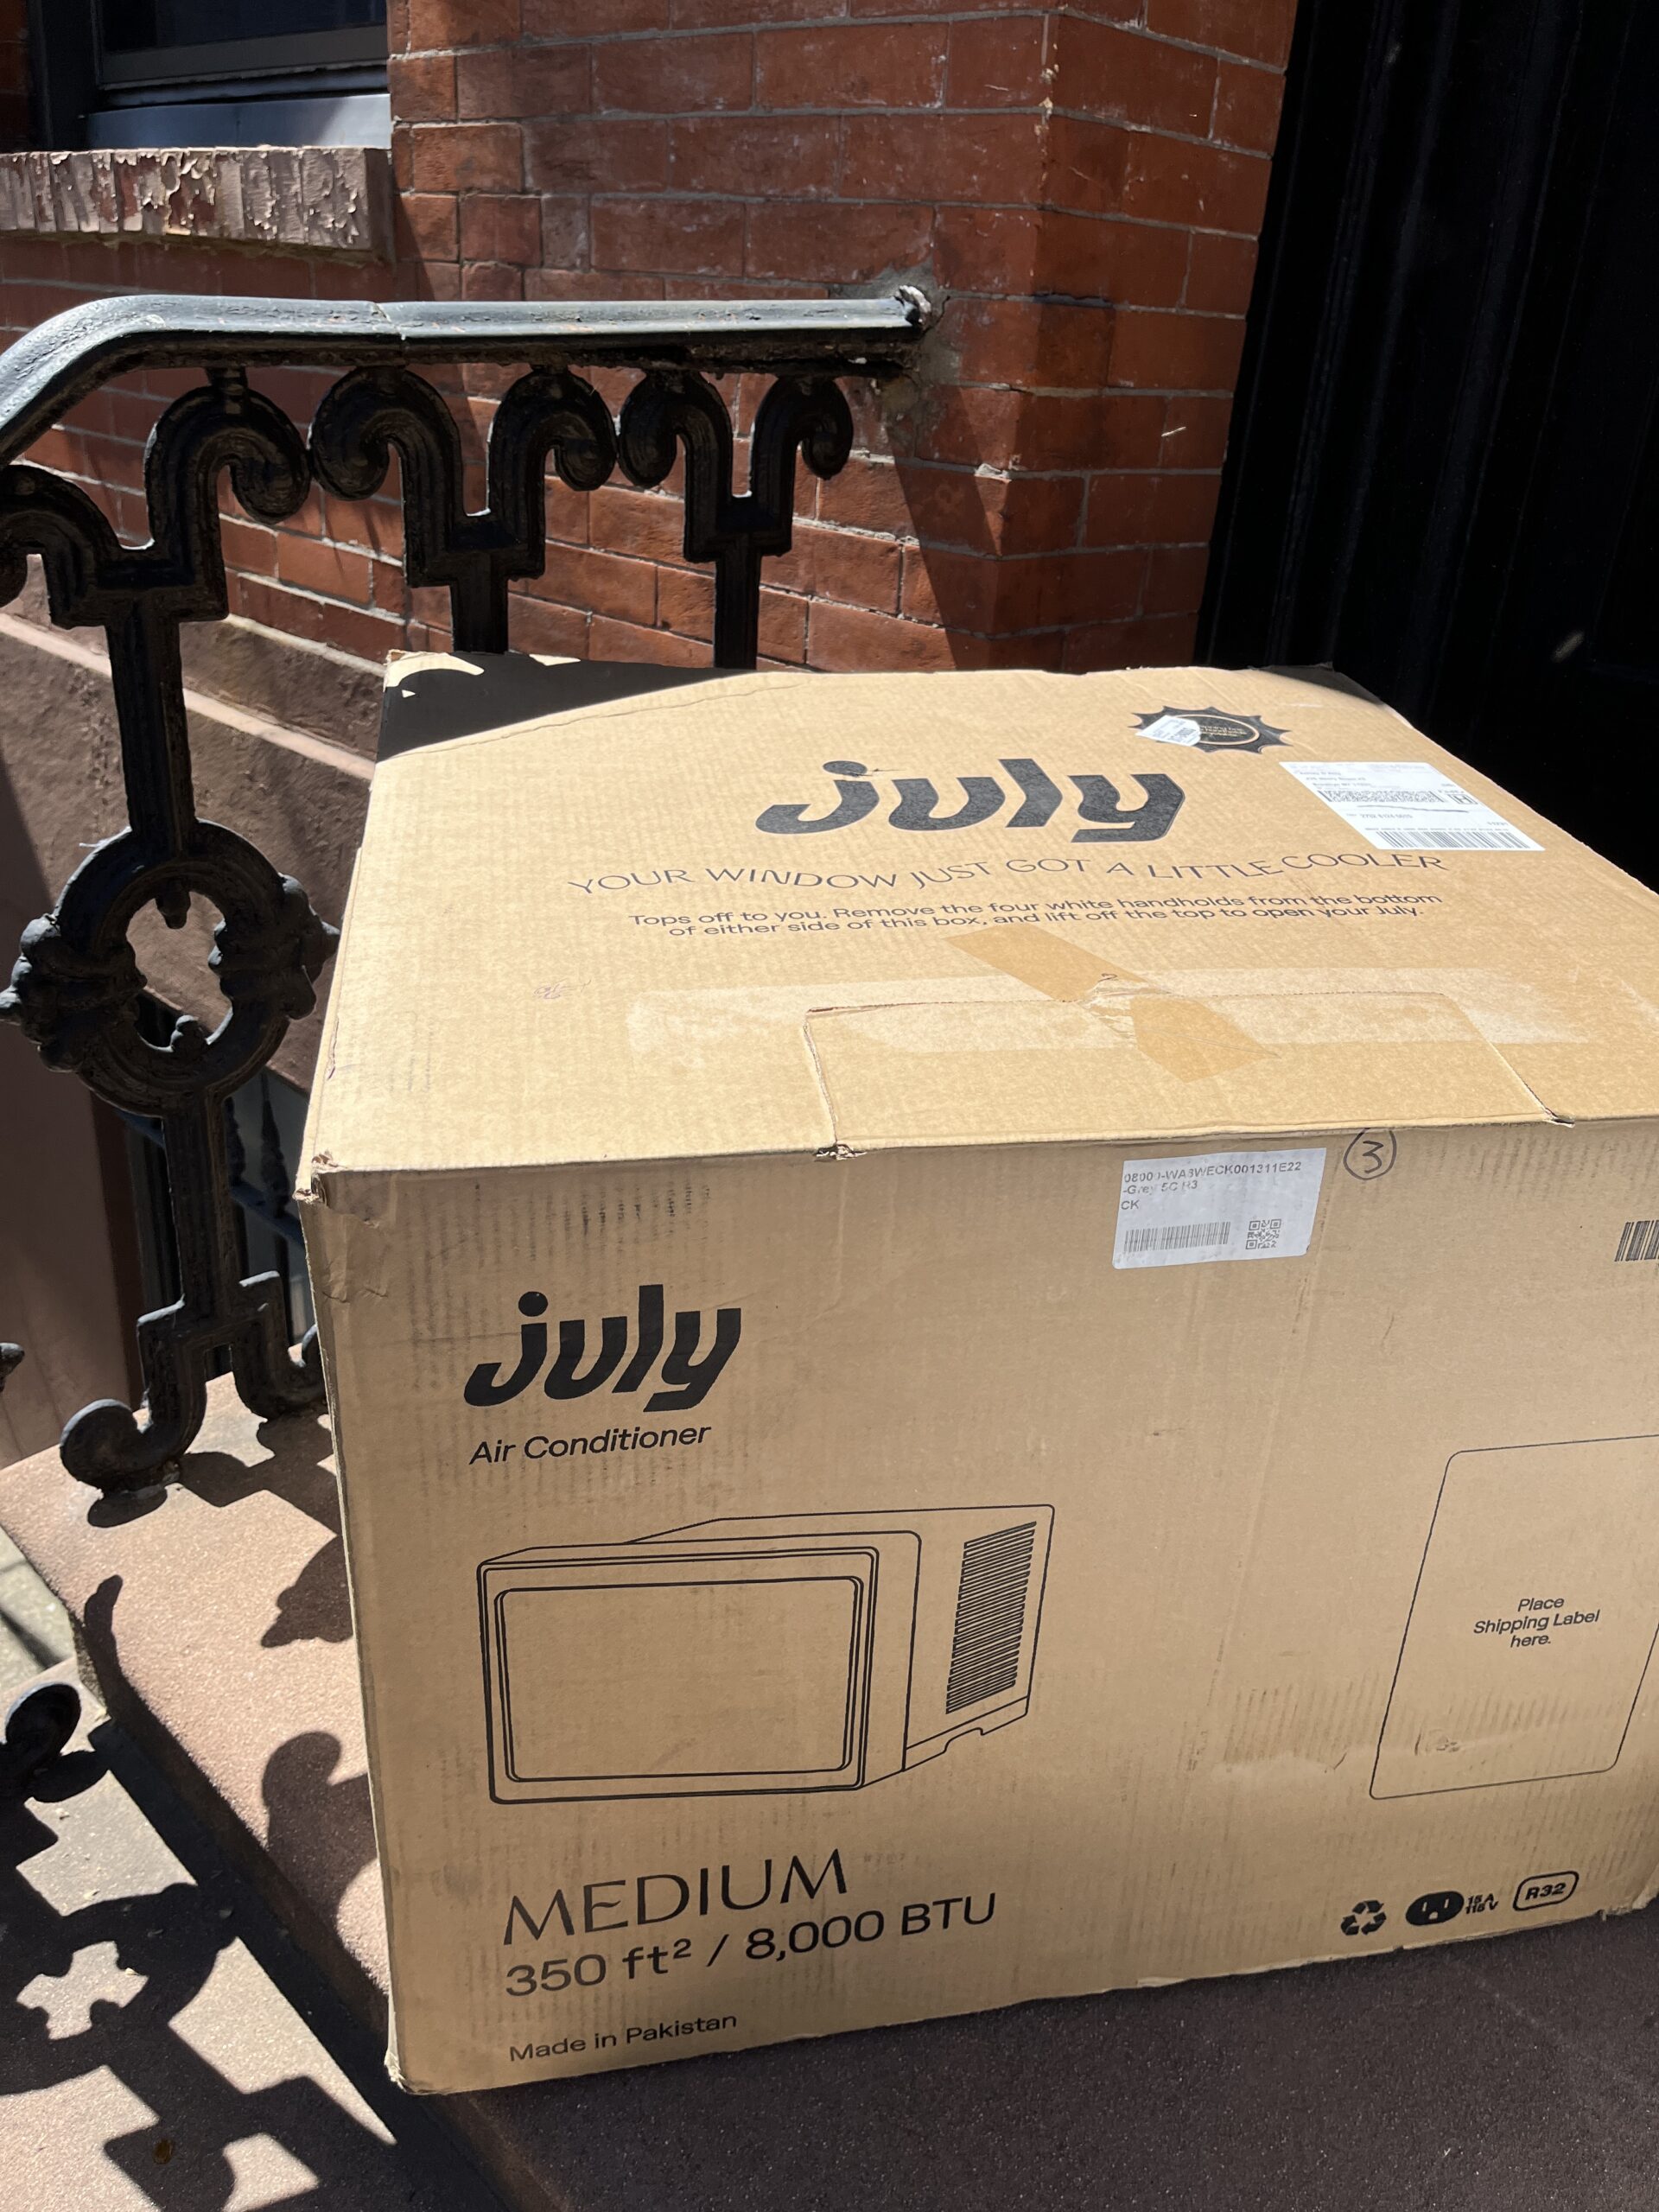 A large cardboard box labeled "July Air Conditioner" sits on a doorstep next to a wrought iron railing. The box is for a medium 8,000 BTU unit intended for 350 sq ft.